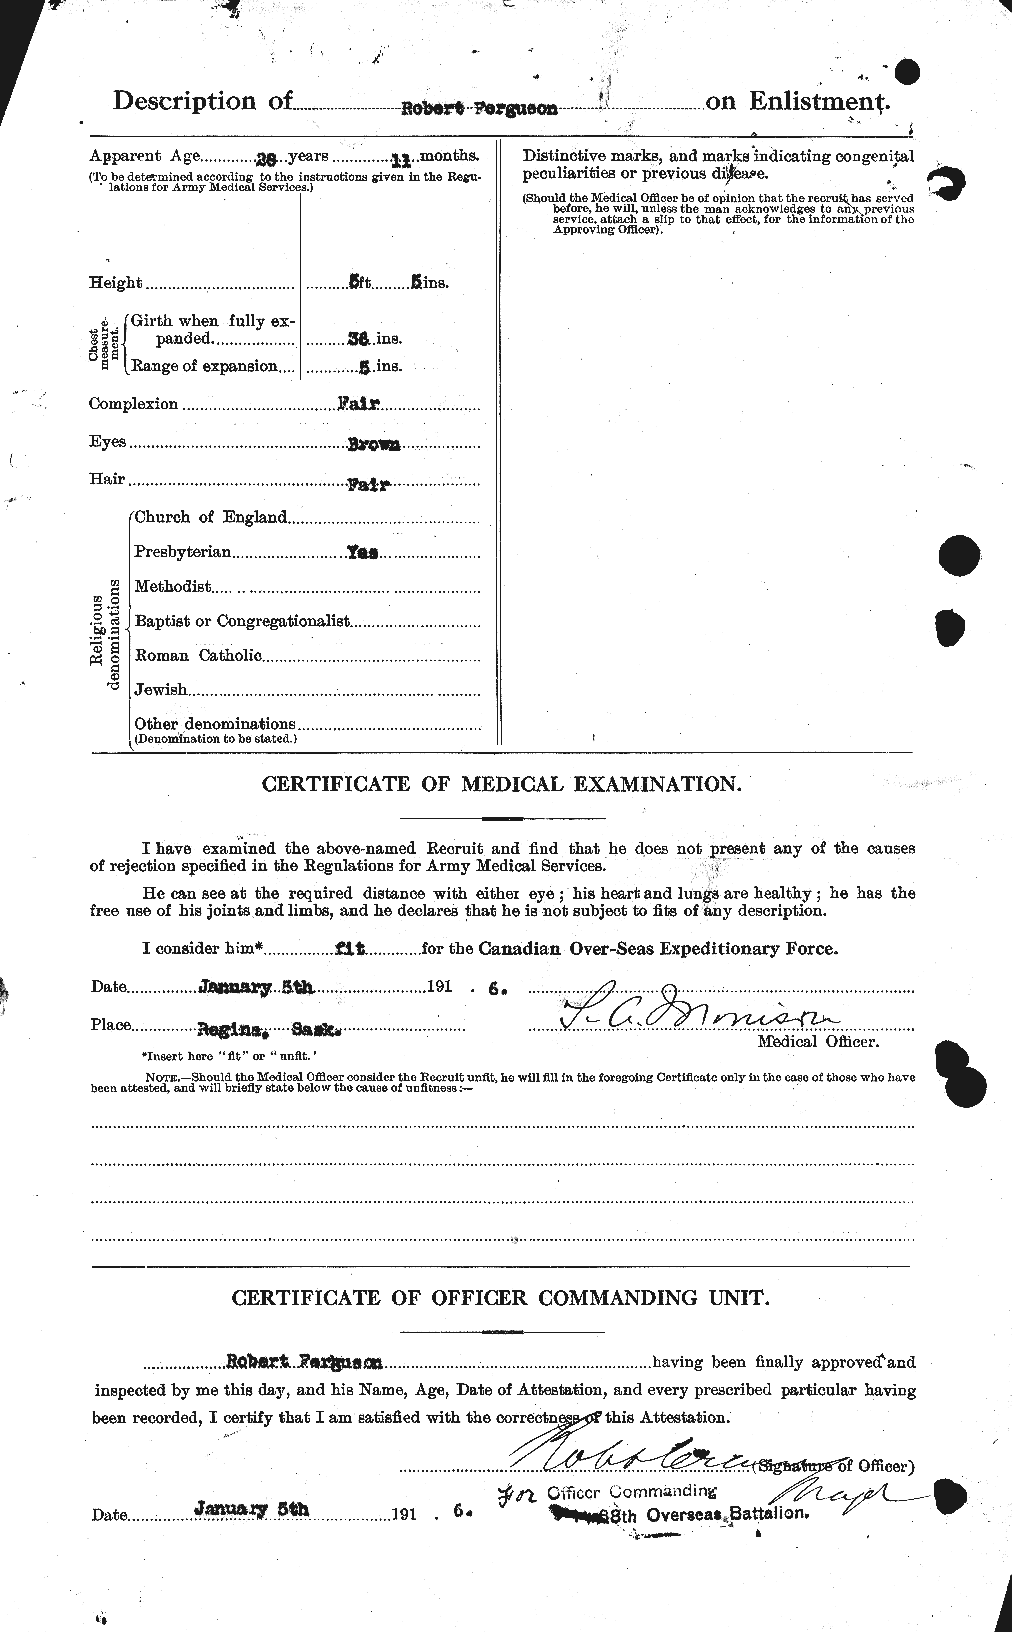 Personnel Records of the First World War - CEF 321228b